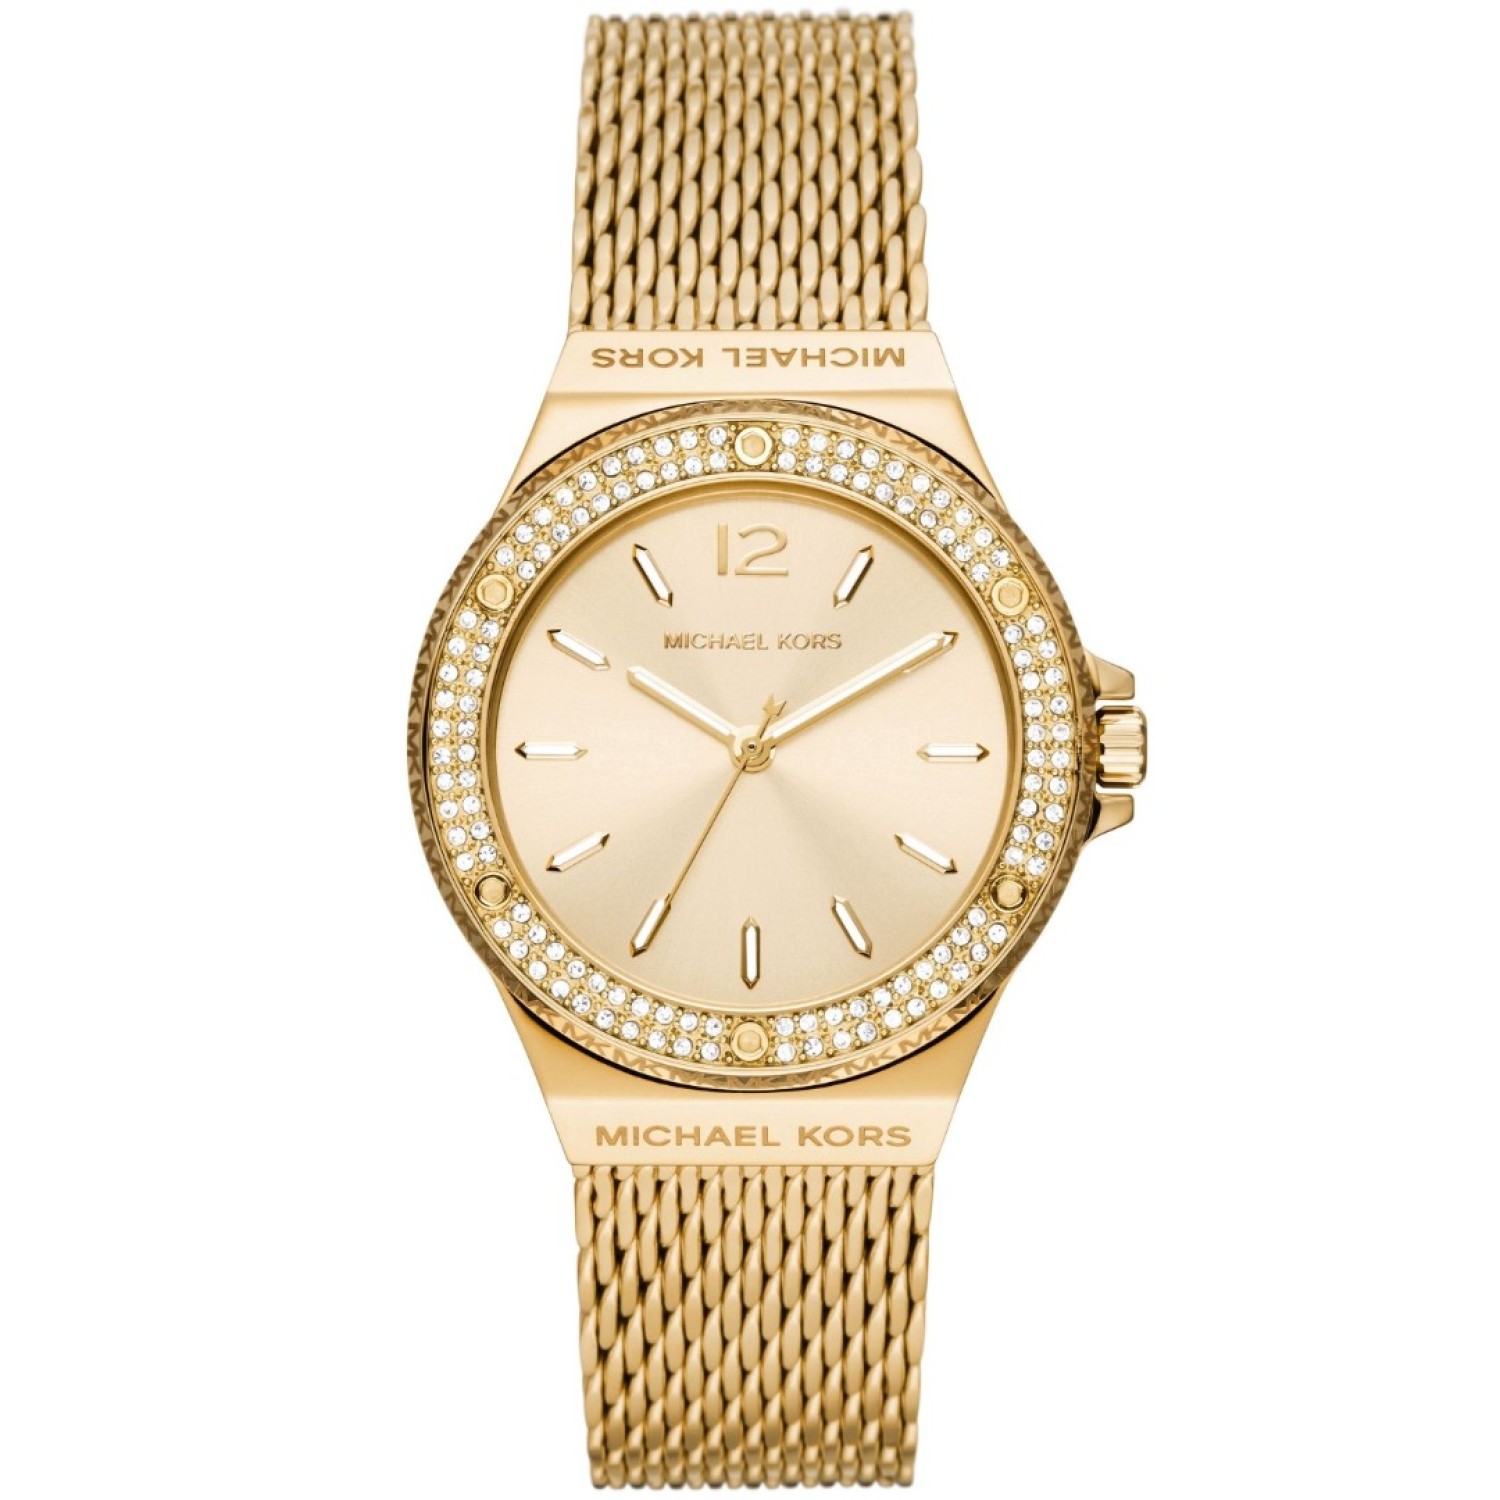 MK7335 Michael Kors Lennox  Gold-Tone Watch. MK7335 Michael Kors Lennox Three-Hand  Gold-Tone Stainless Steel WatchThe Michael Kors MK7335 is a luxurious and stylish women's watch that exudes sophistication and class.